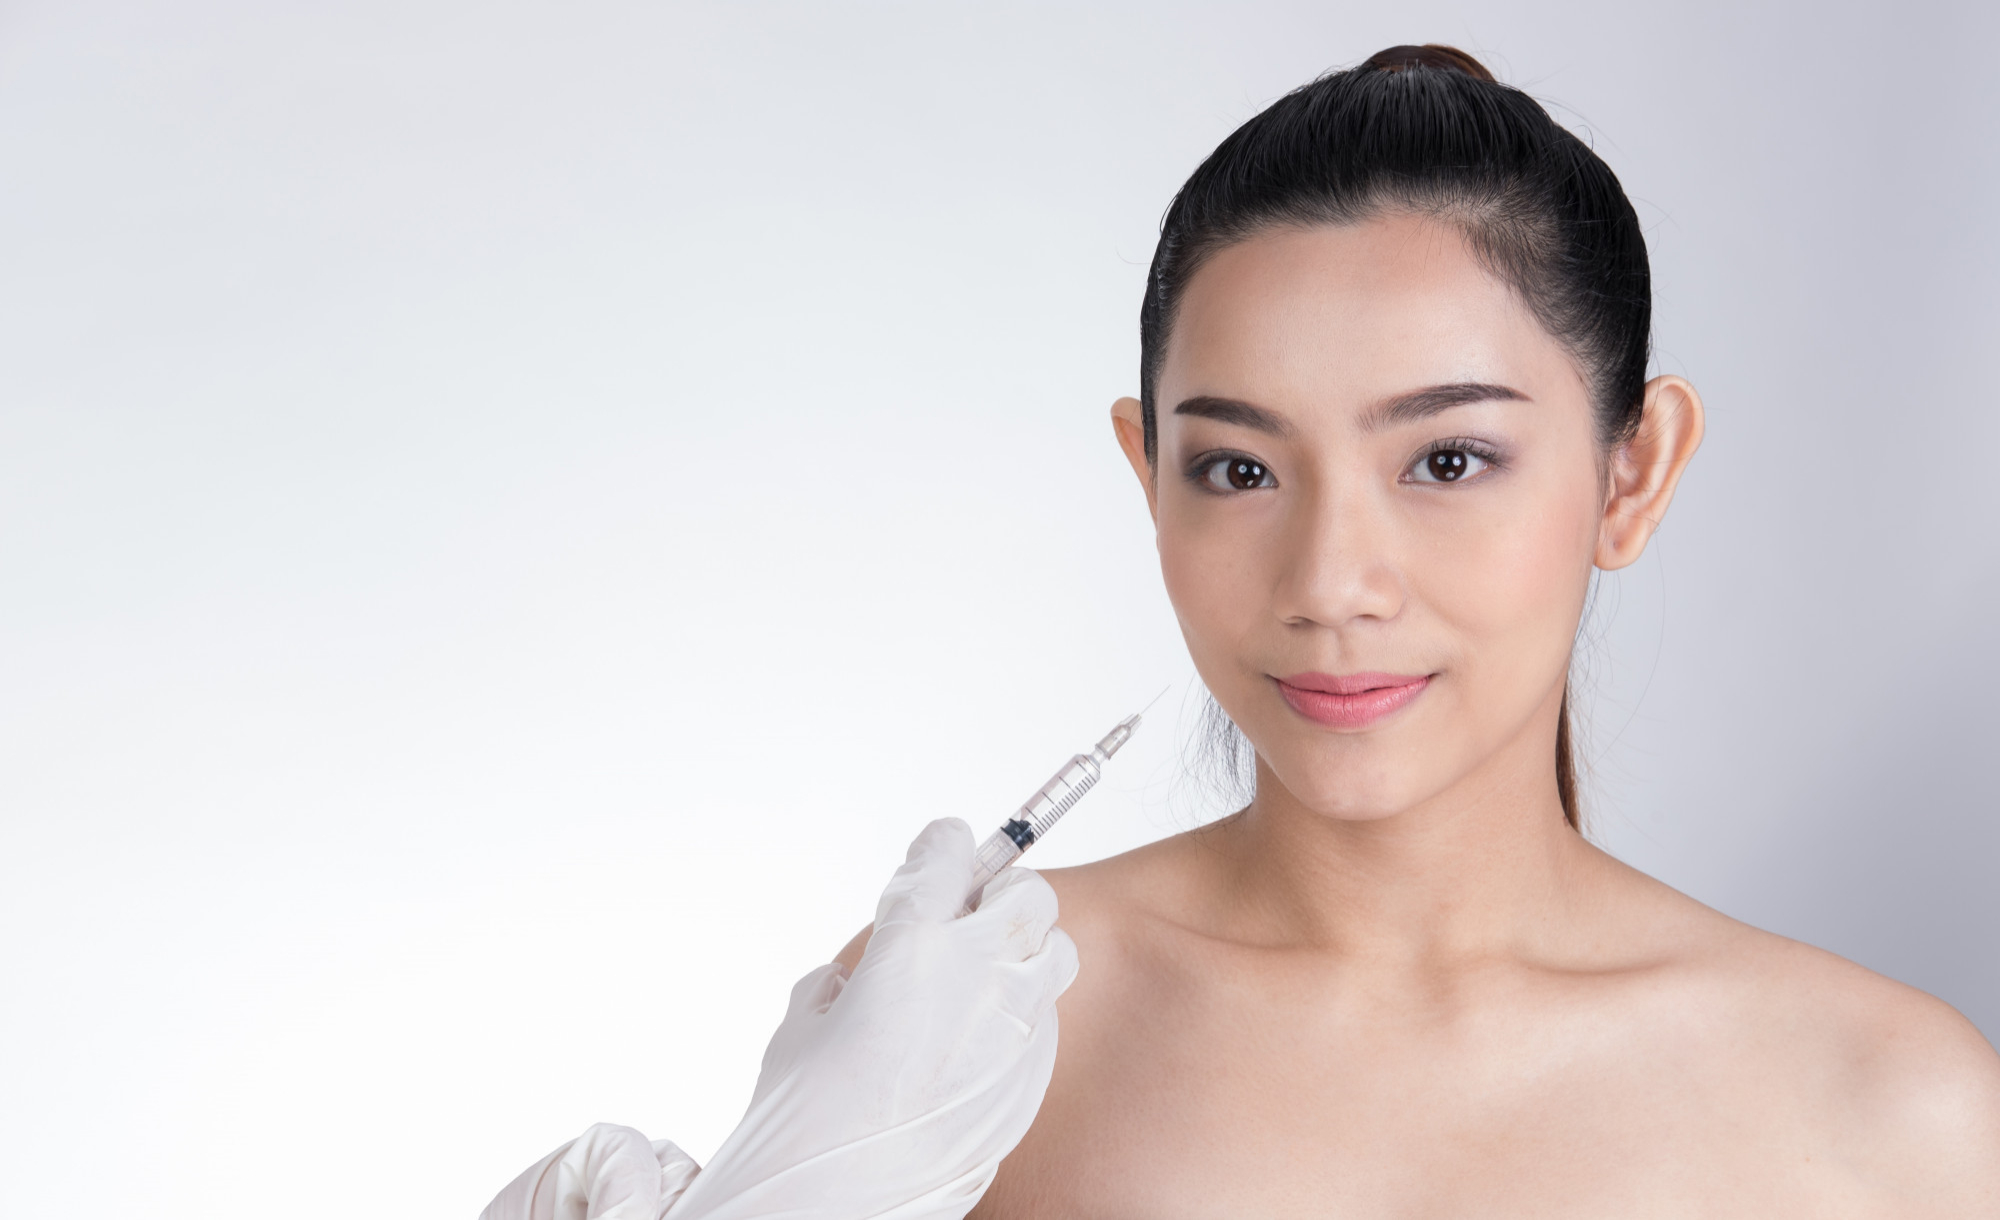 A woman receives Restylane to enhance her skin and overall appearance.